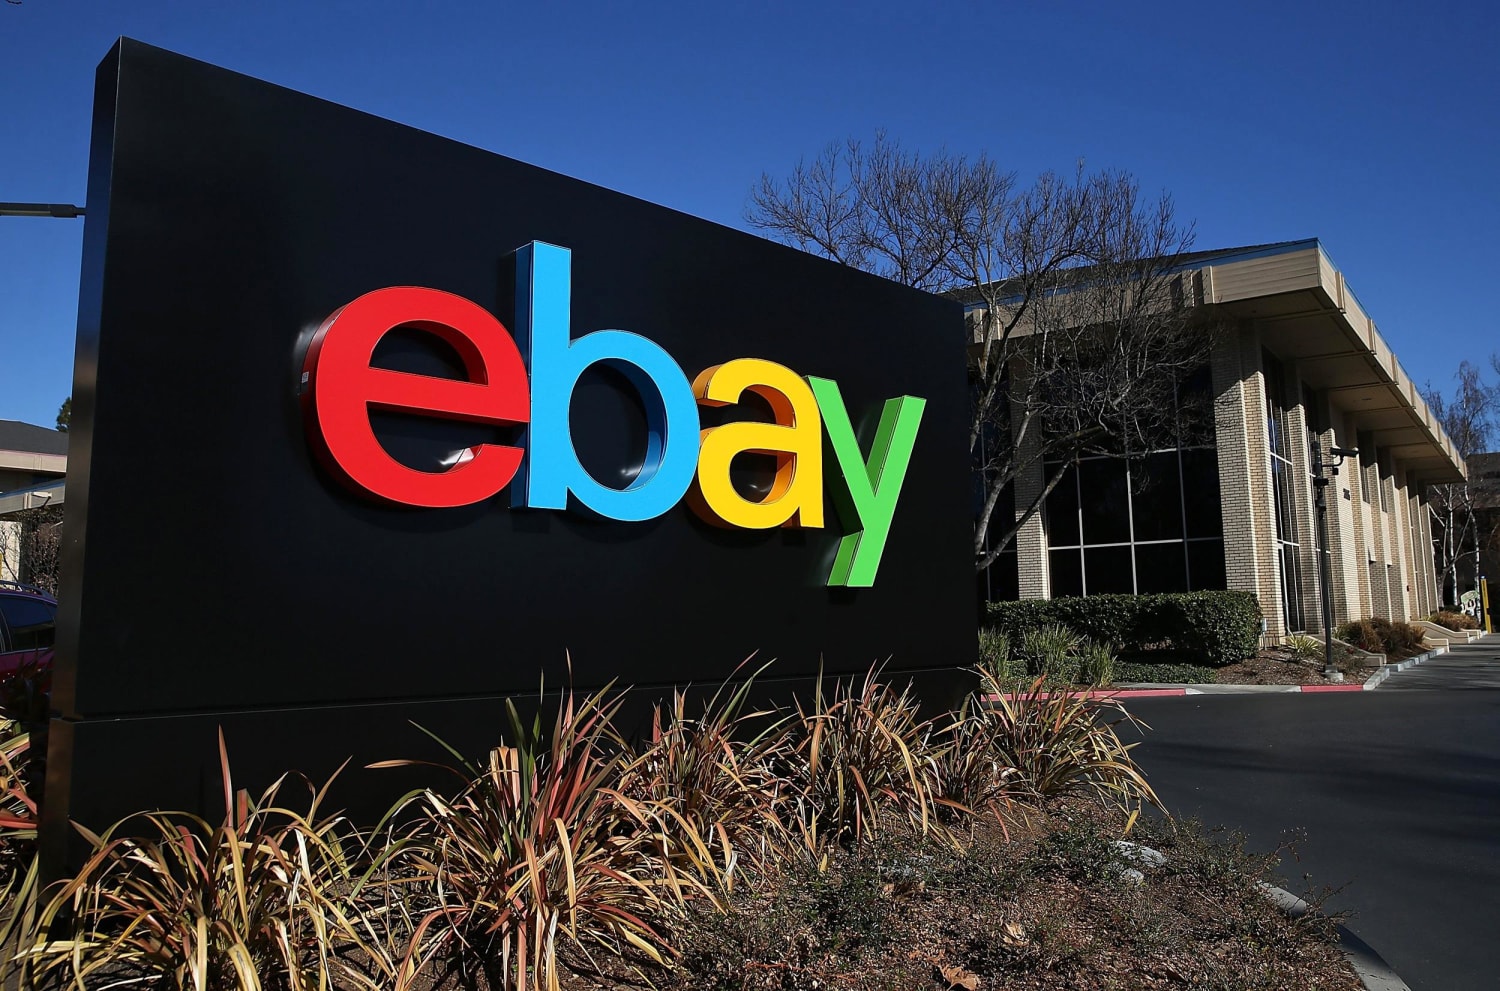 eBay Warns Customers to Change Passwords After Database Hacked - NBC News